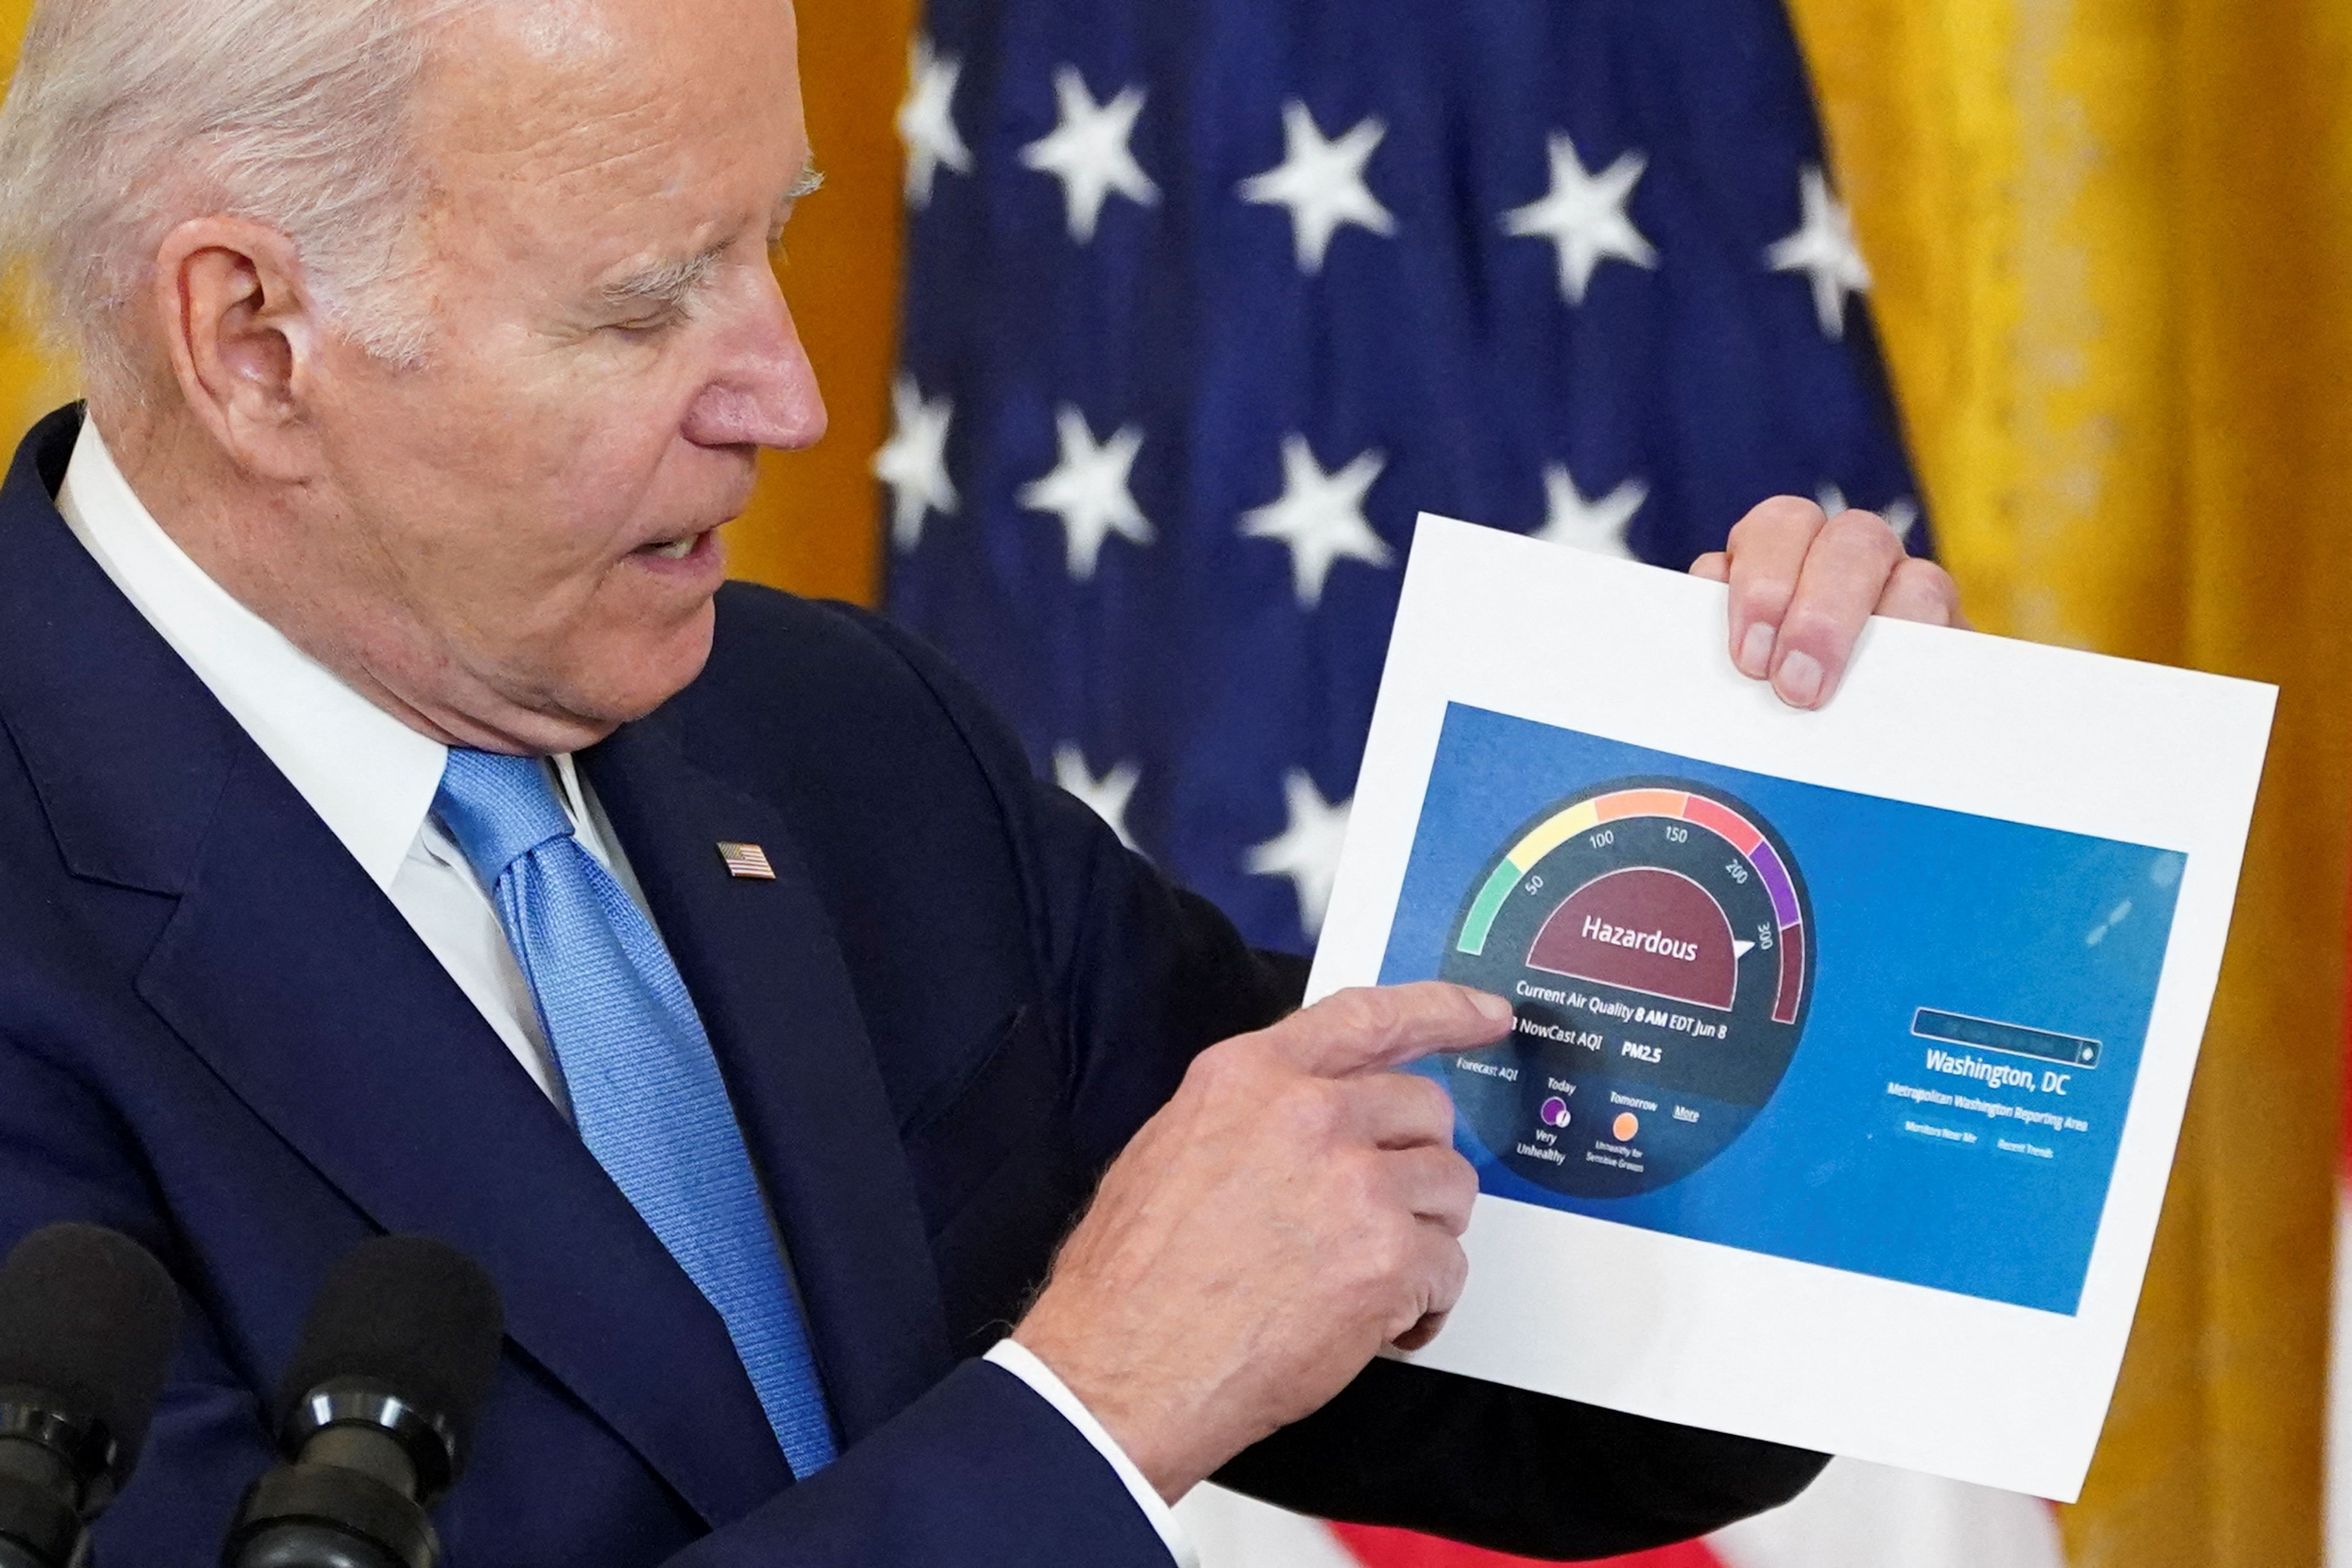 Biden pointing a piece of paper about wildfire smoke.